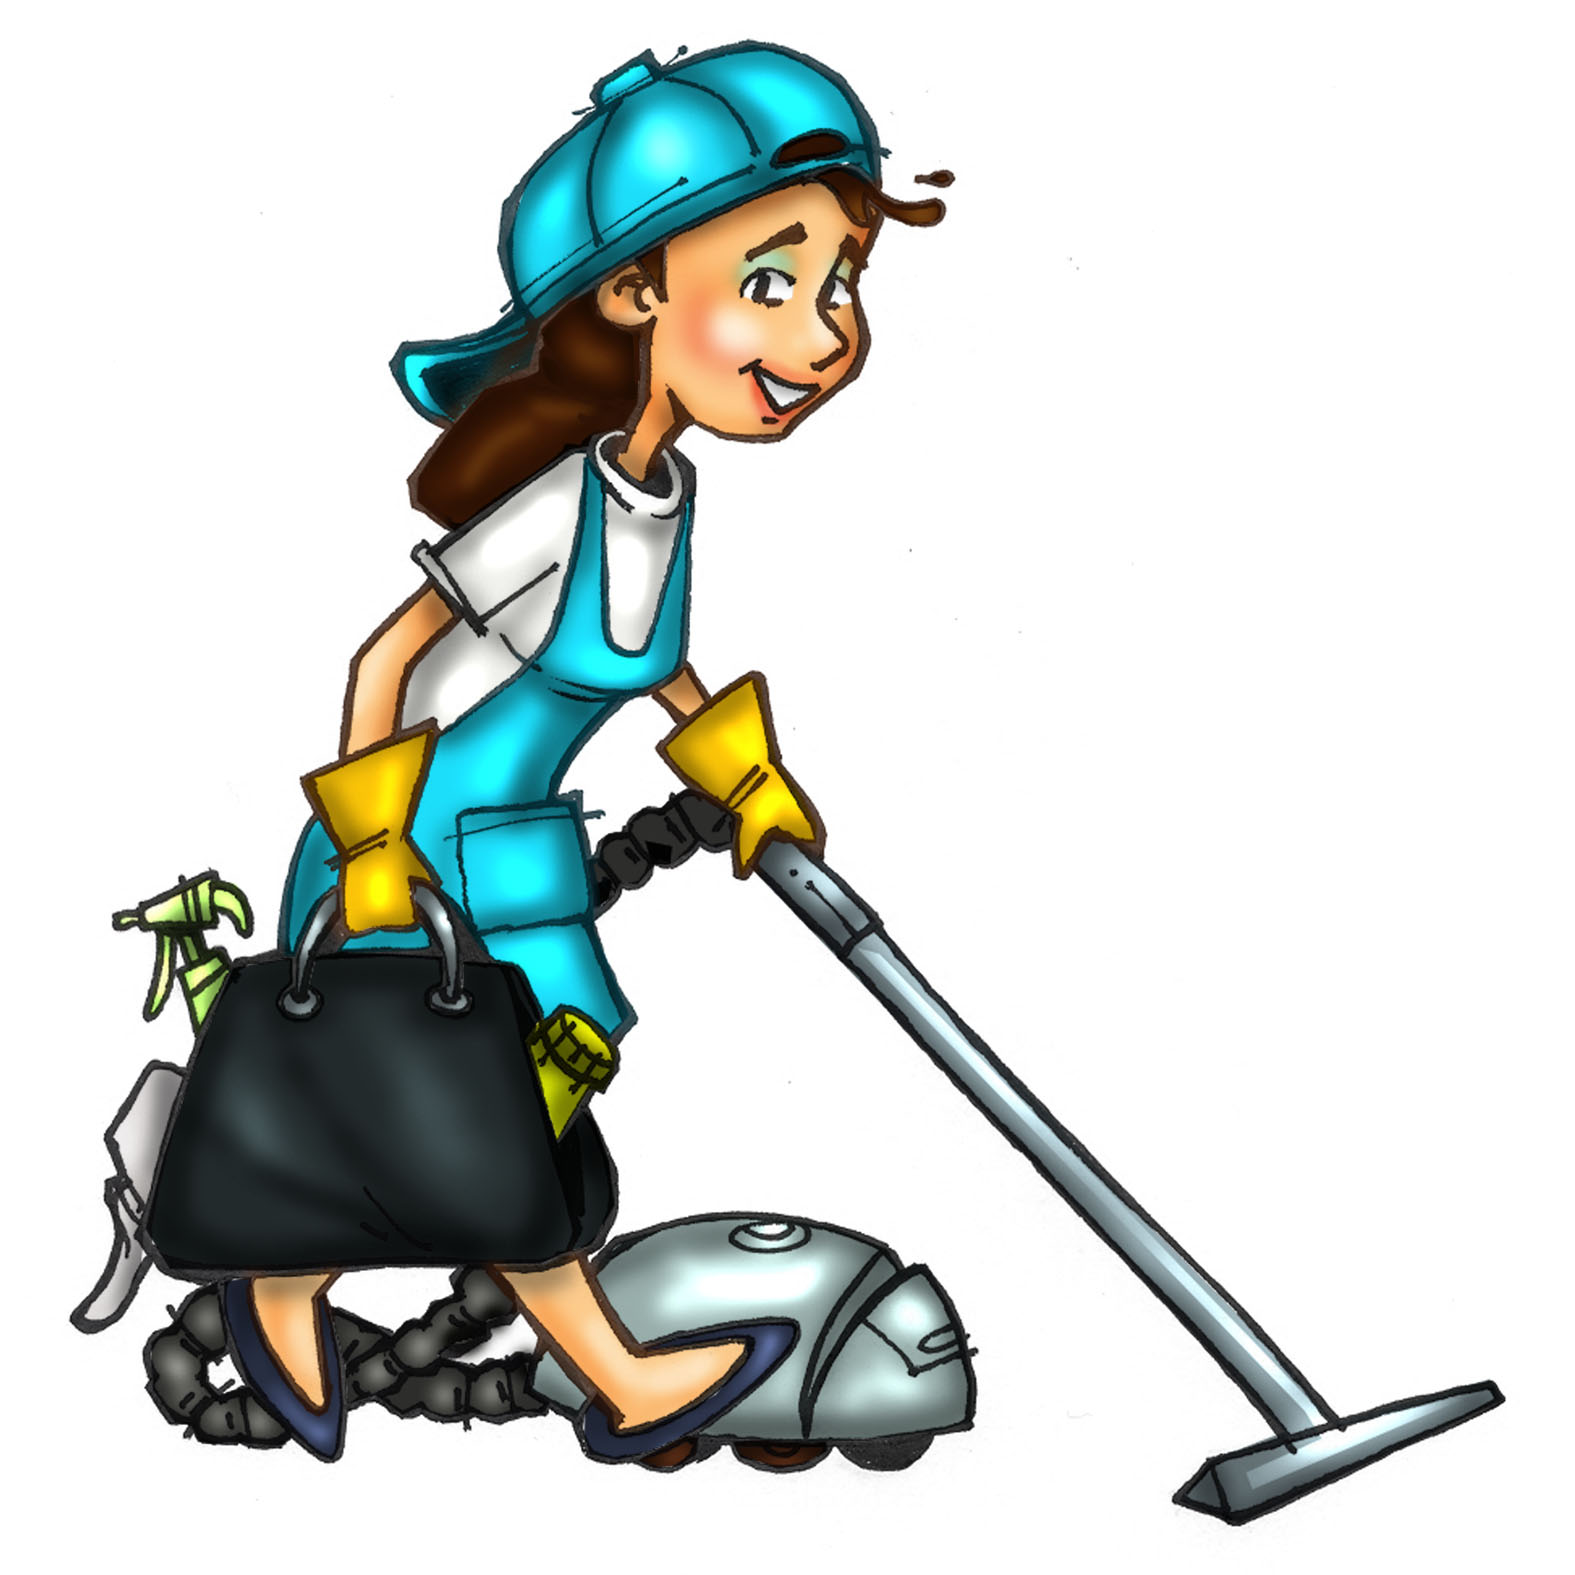 Pictures Of House Cleaning | Free Download Clip Art | Free Clip ...